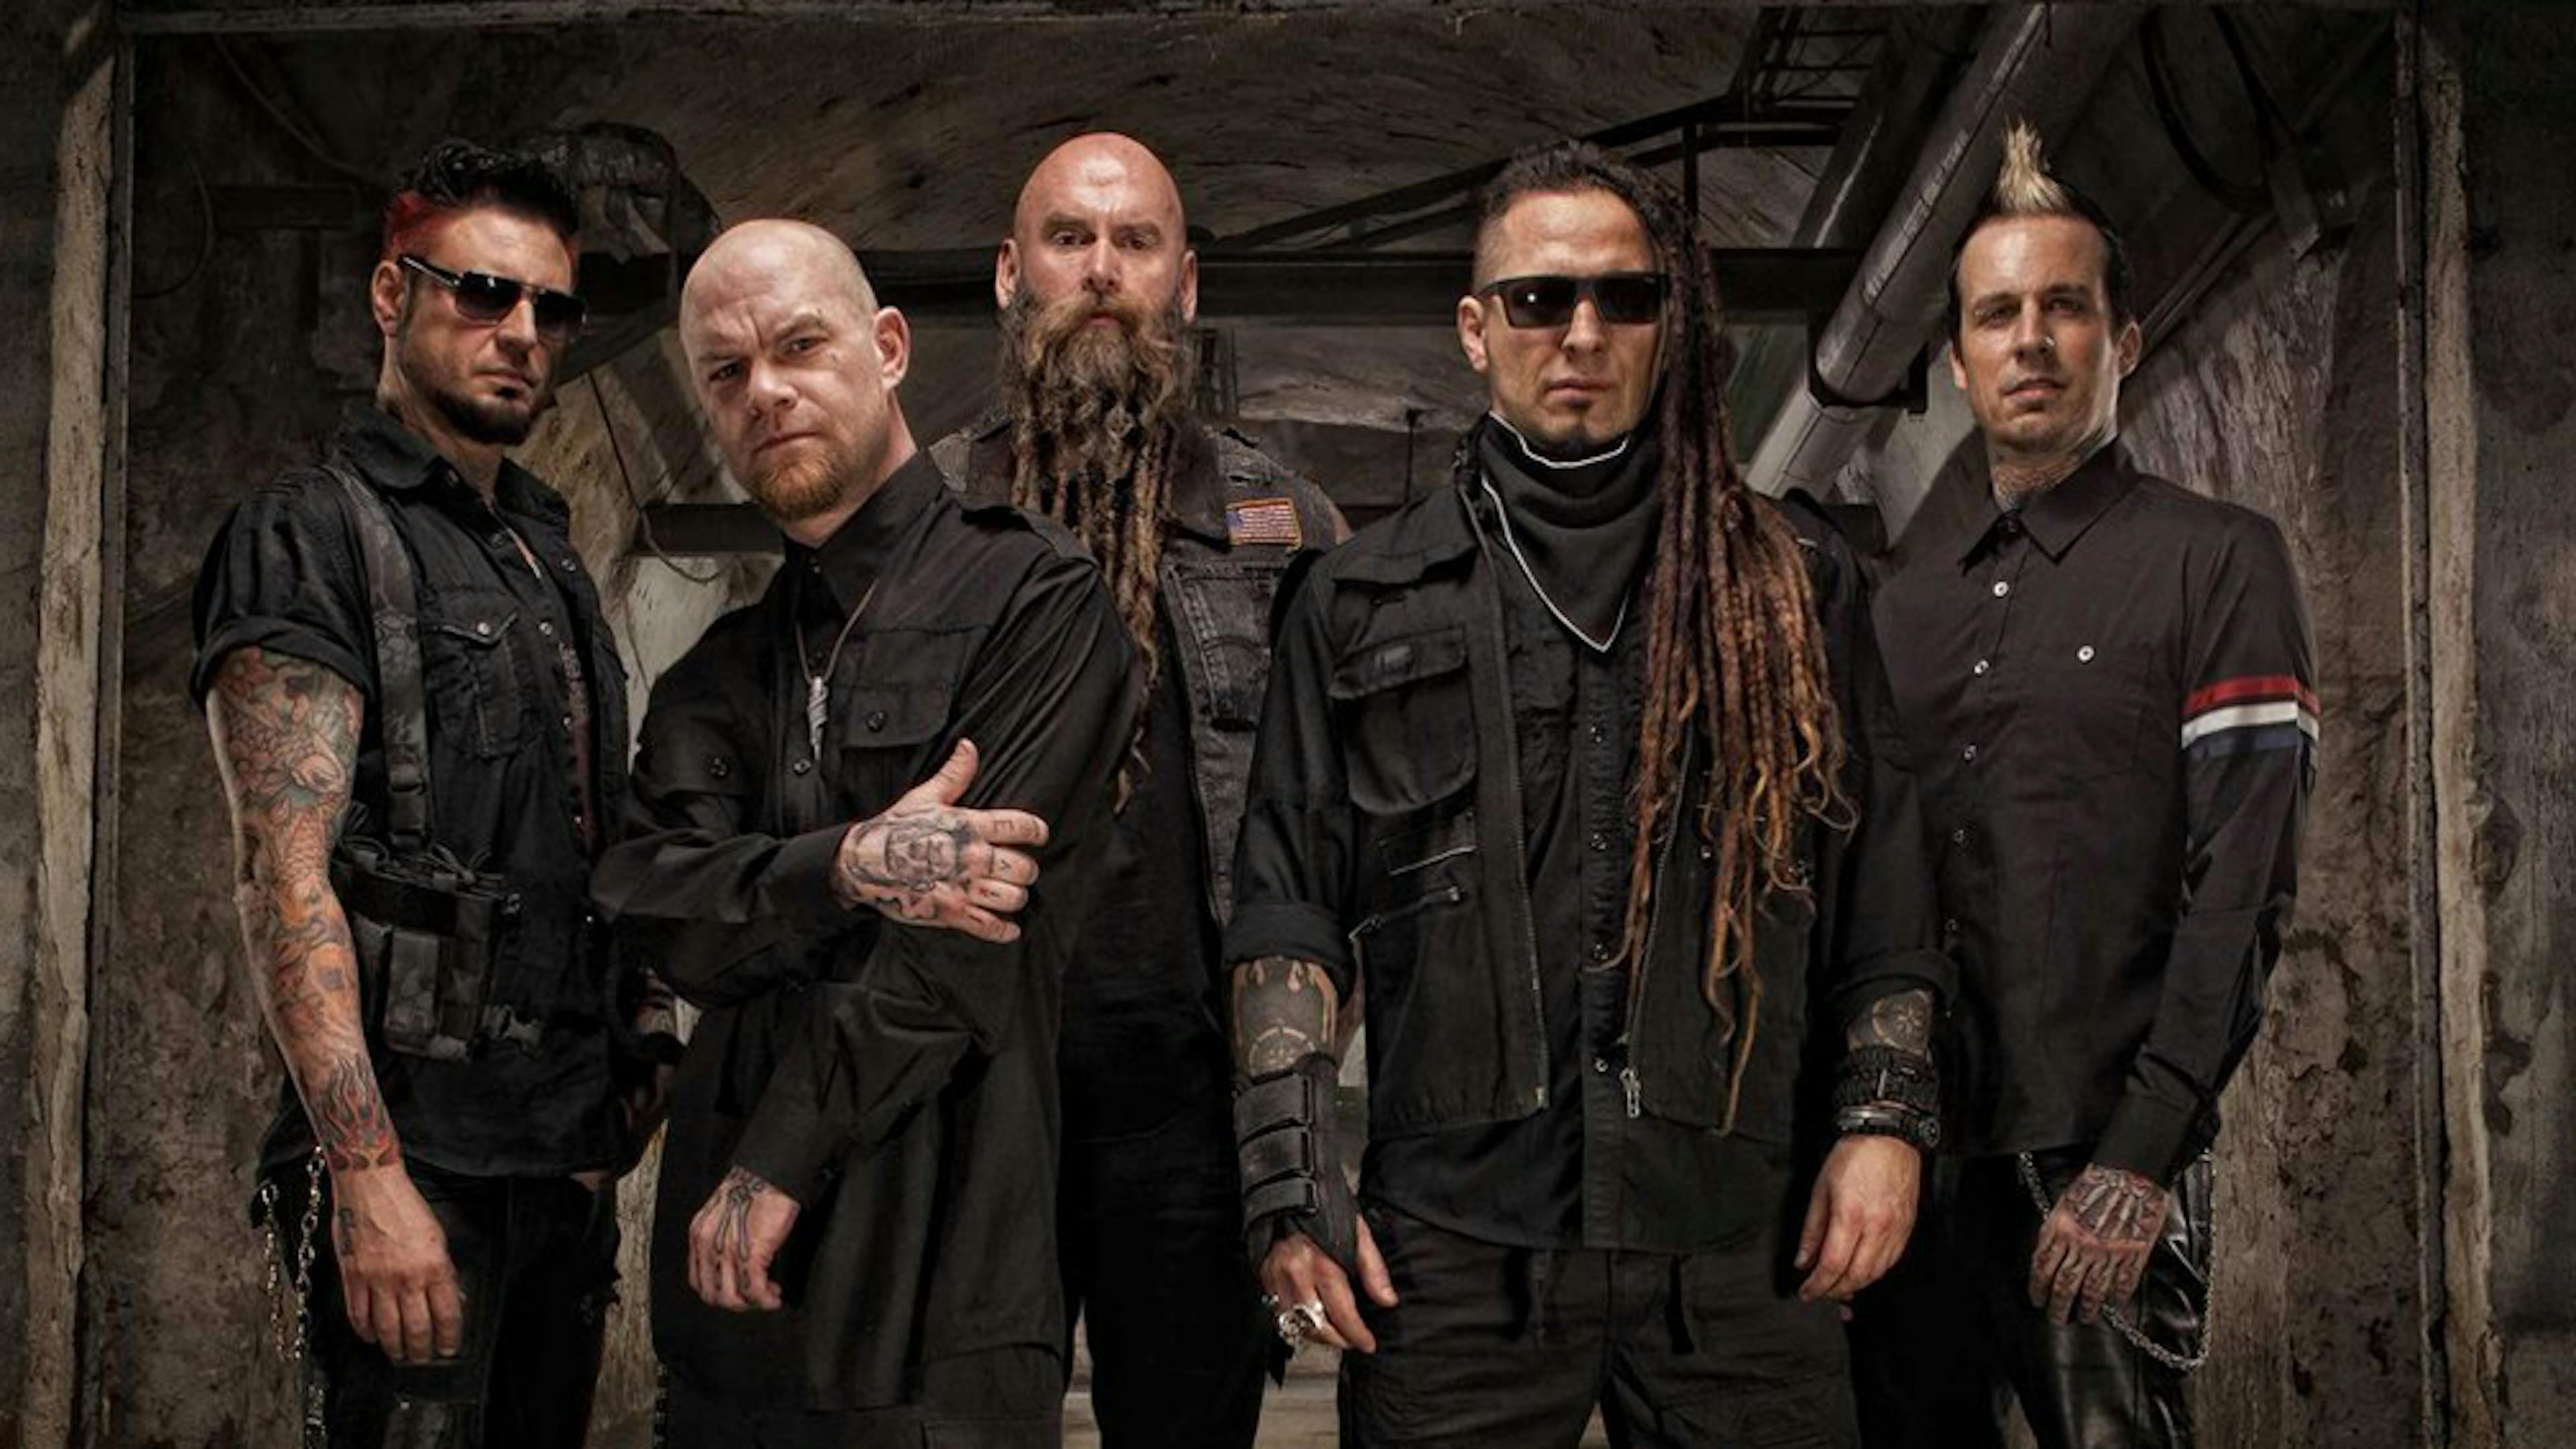 Five Finger Death Punch Frontman Launches New Range Of Cannabis-Infused Wellness Products